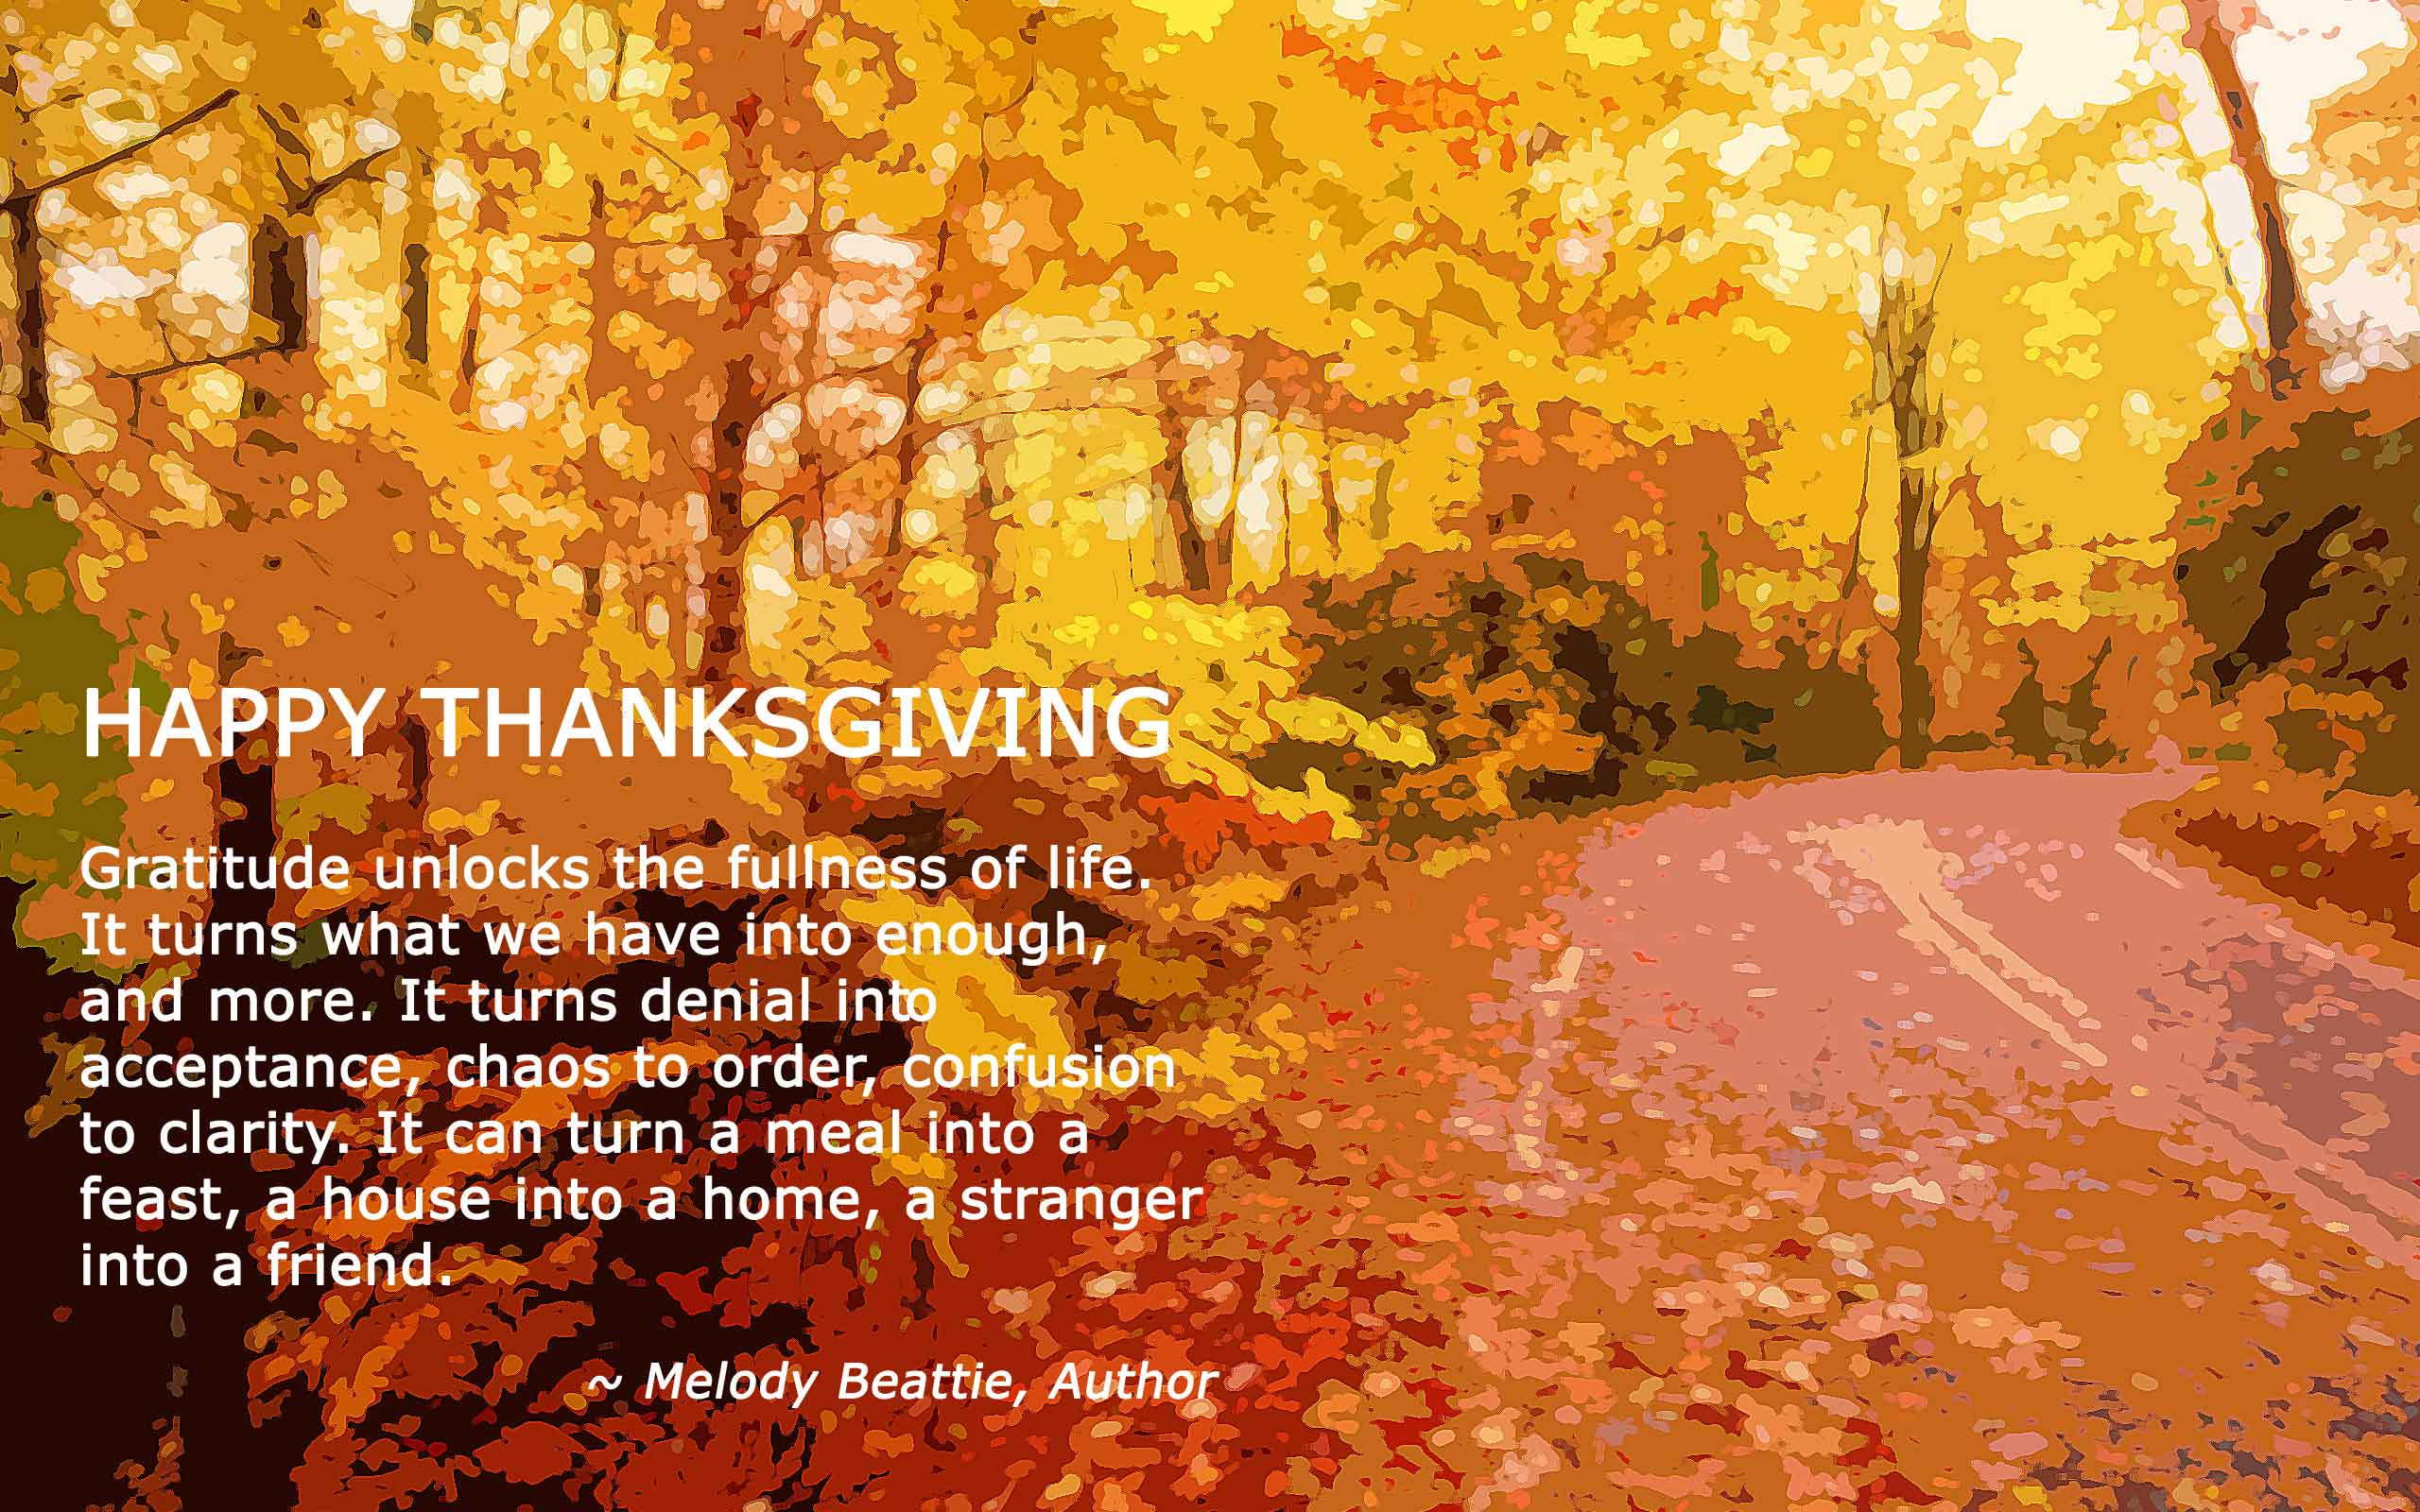 Quote Of Thanksgiving
 Happy Thanksgiving Be thankful be joyful and remember